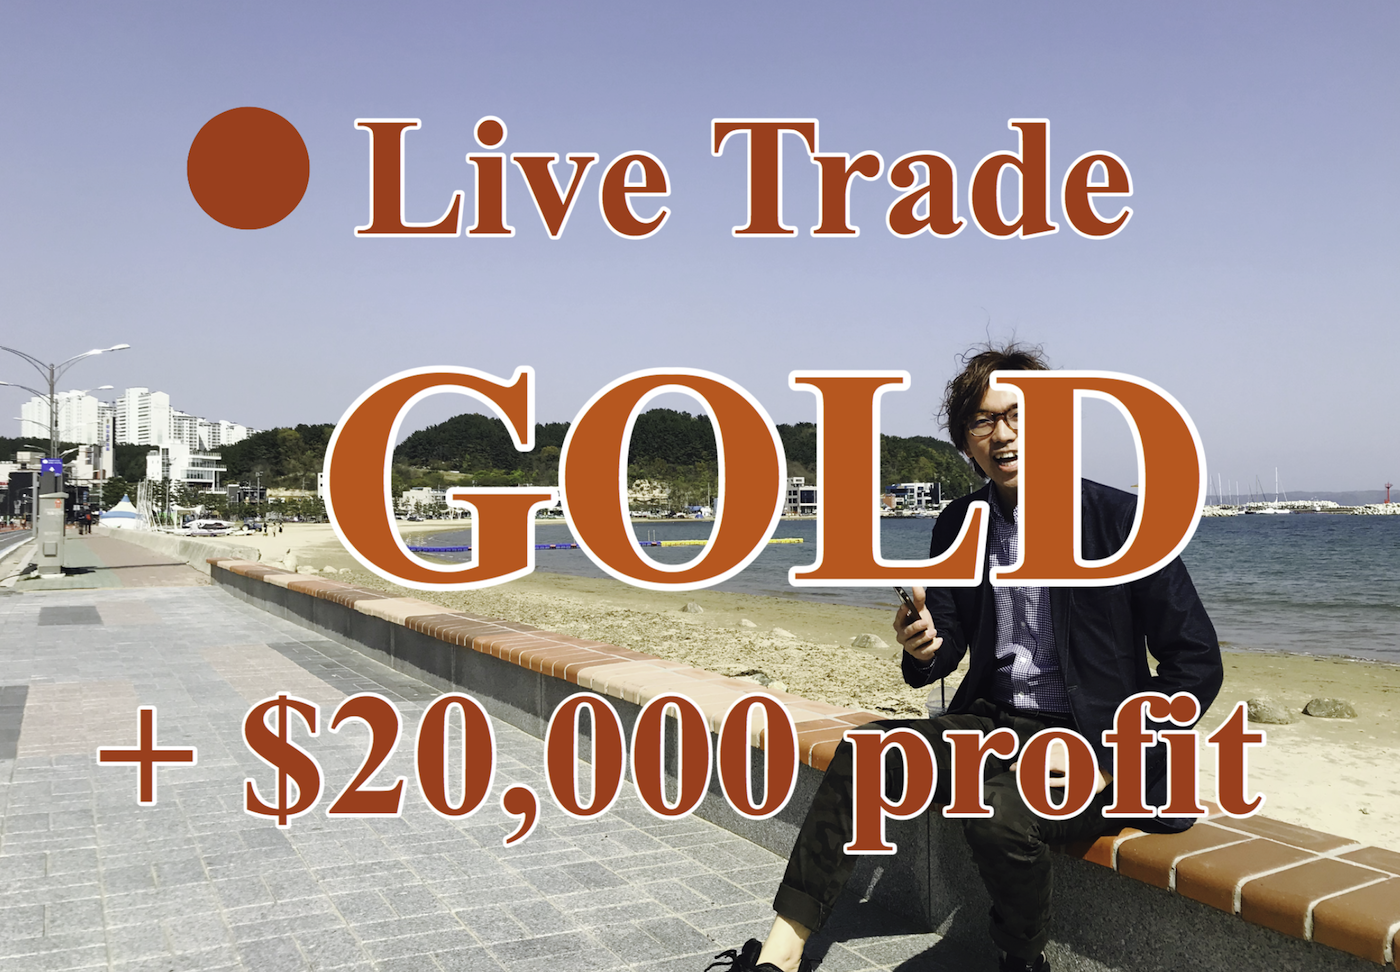 LIVE trading between 4th and 5th of June, 2019 on GOLD (over $20,000 Profit)